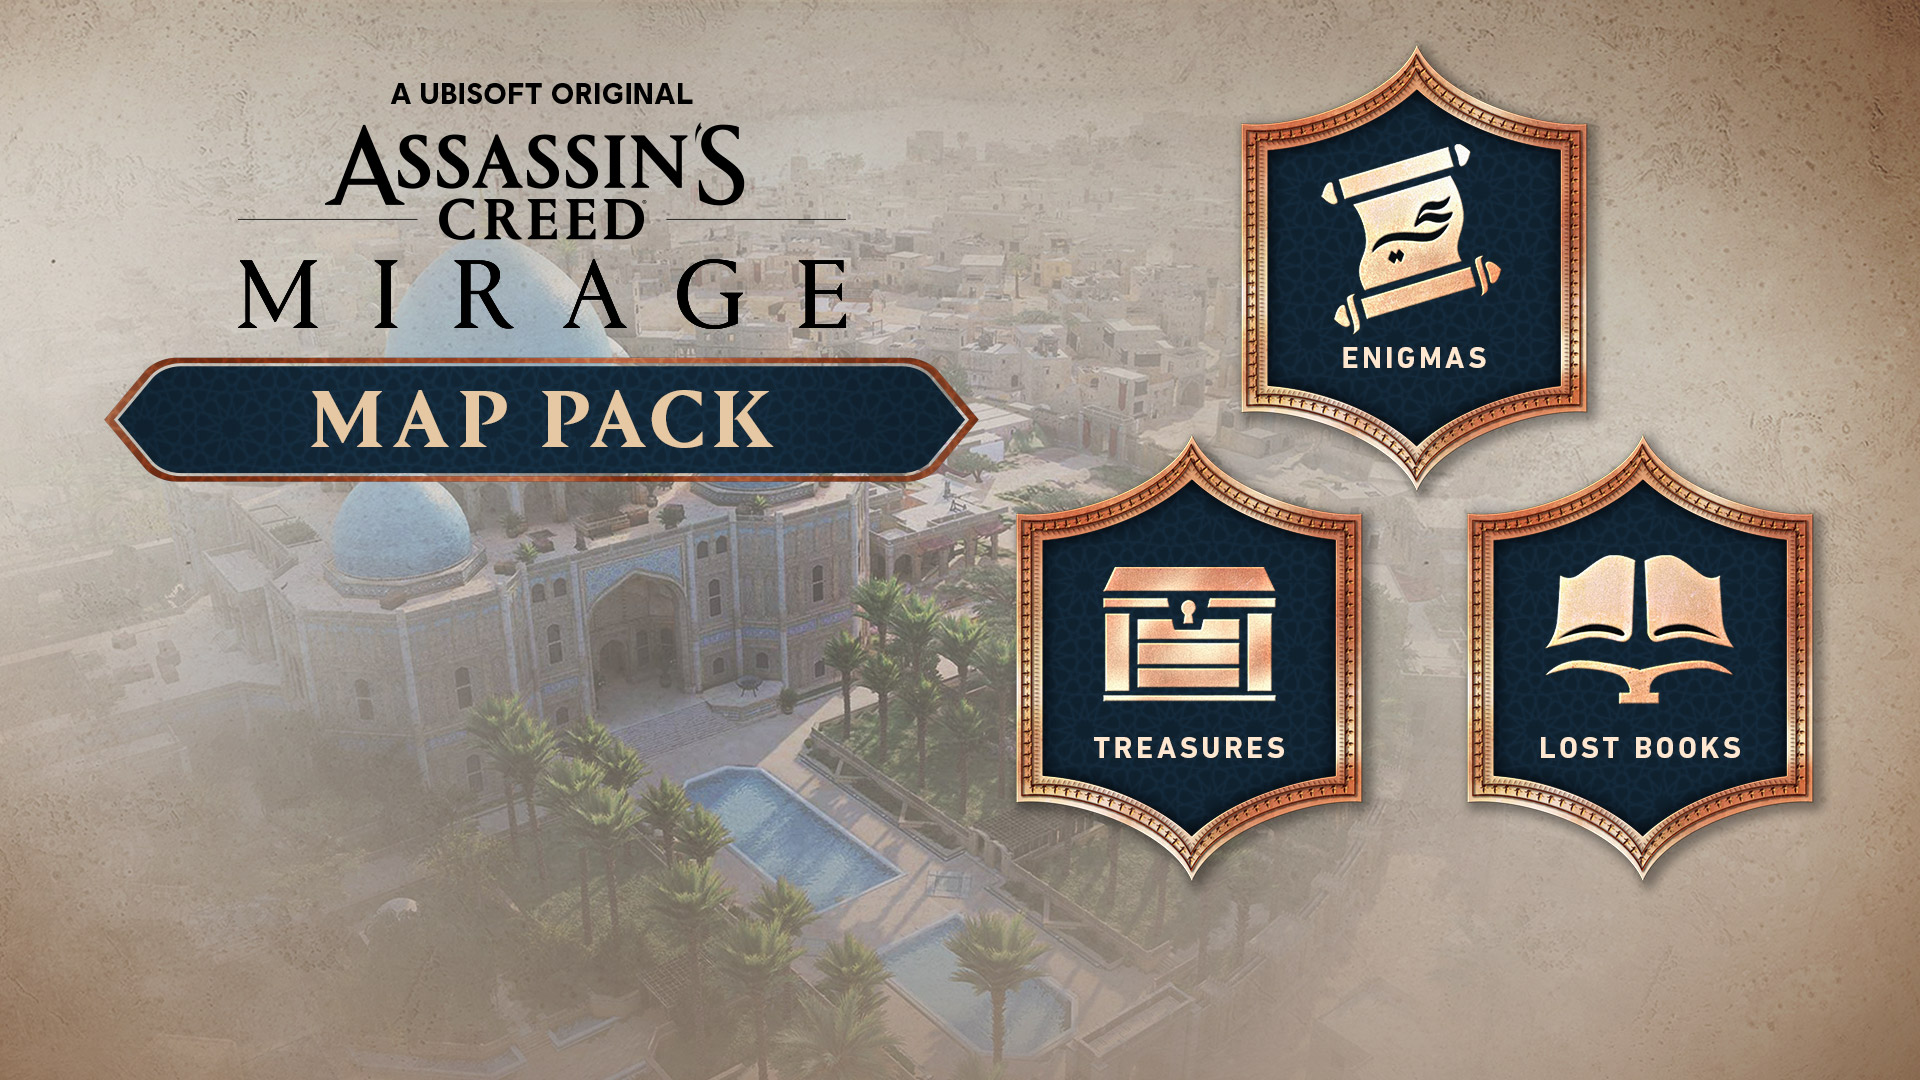 Assassin's Creed Mirage - Map Pack DLC AR XBOX One / Xbox Series X|S CD Key, 7.9 usd